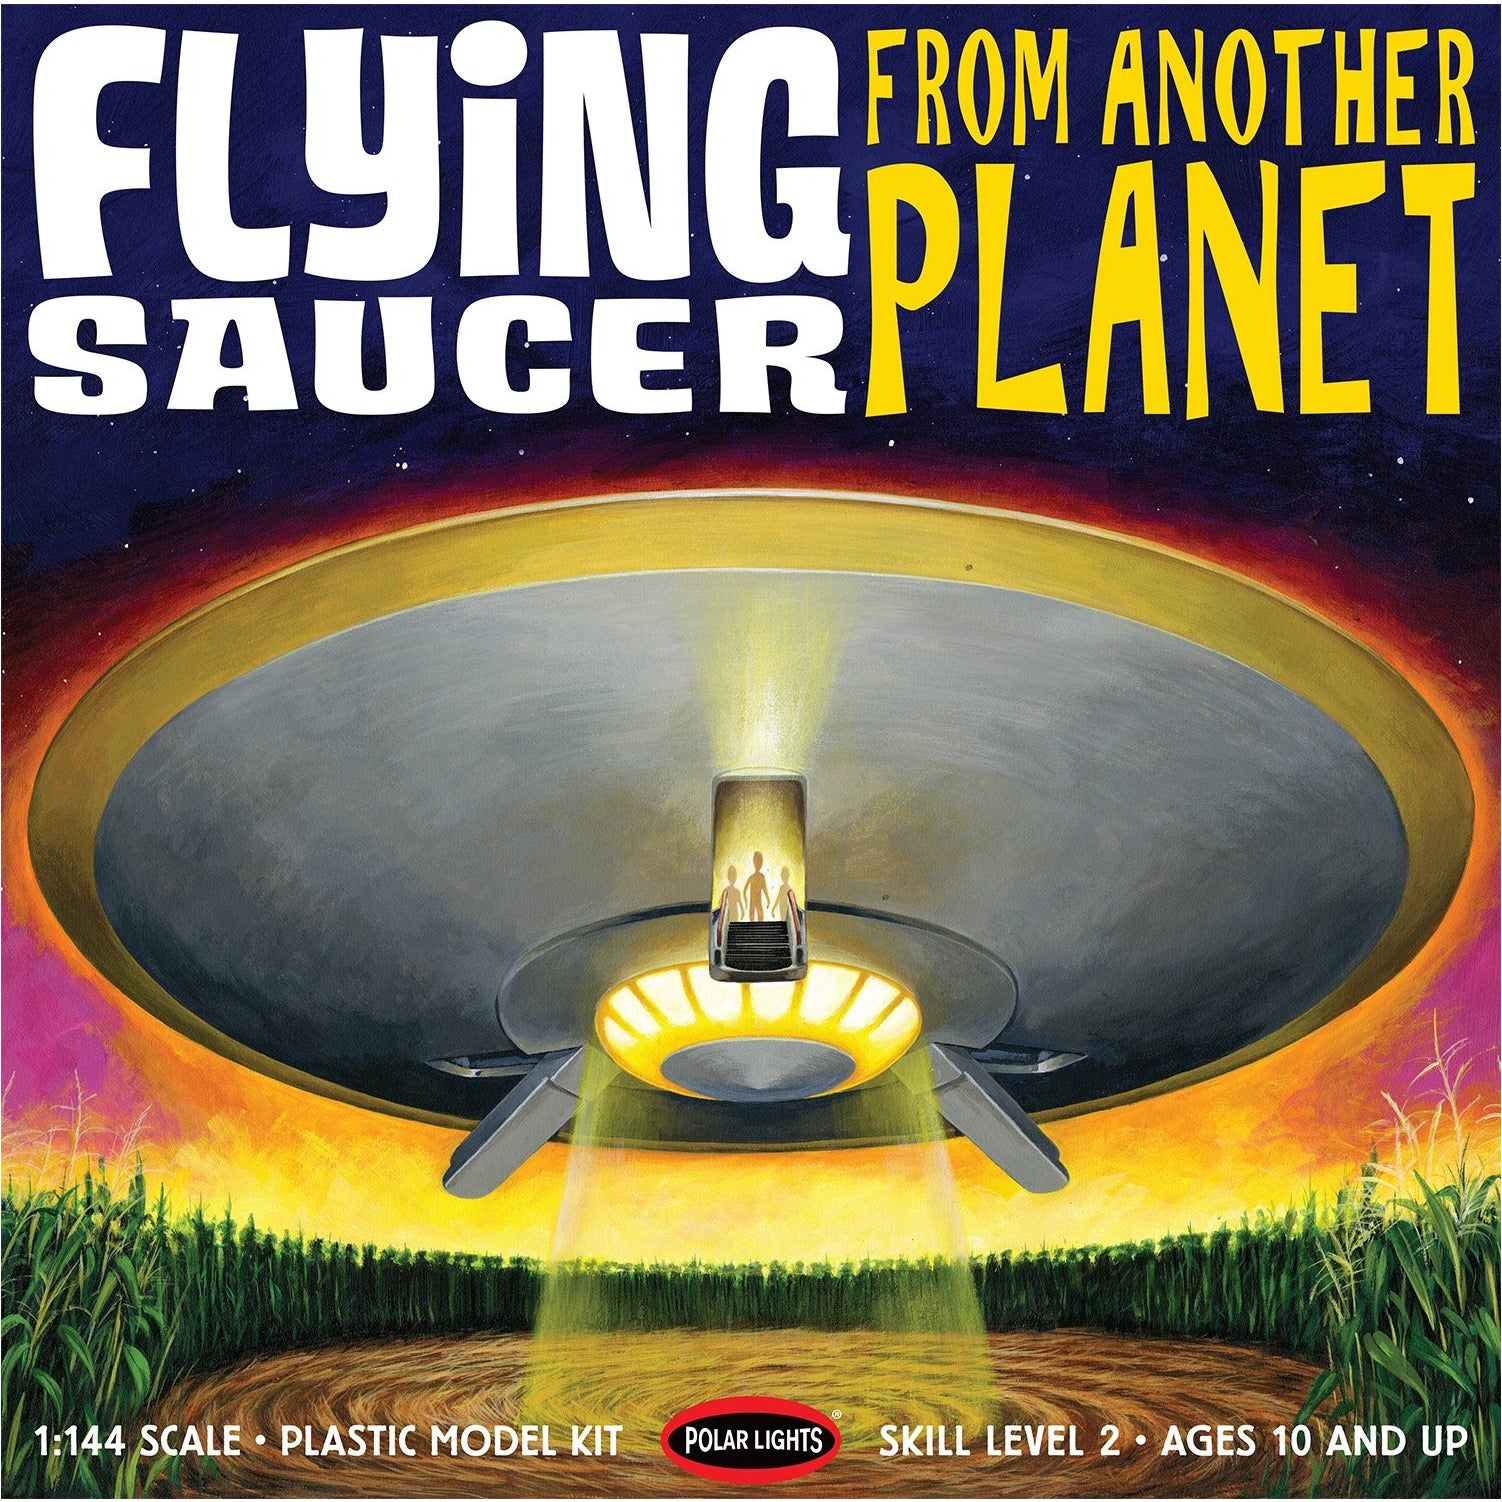 Flying Saucer from Another Planet 1/144 Science Fiction Model Kit #985/12 by Polar Lights